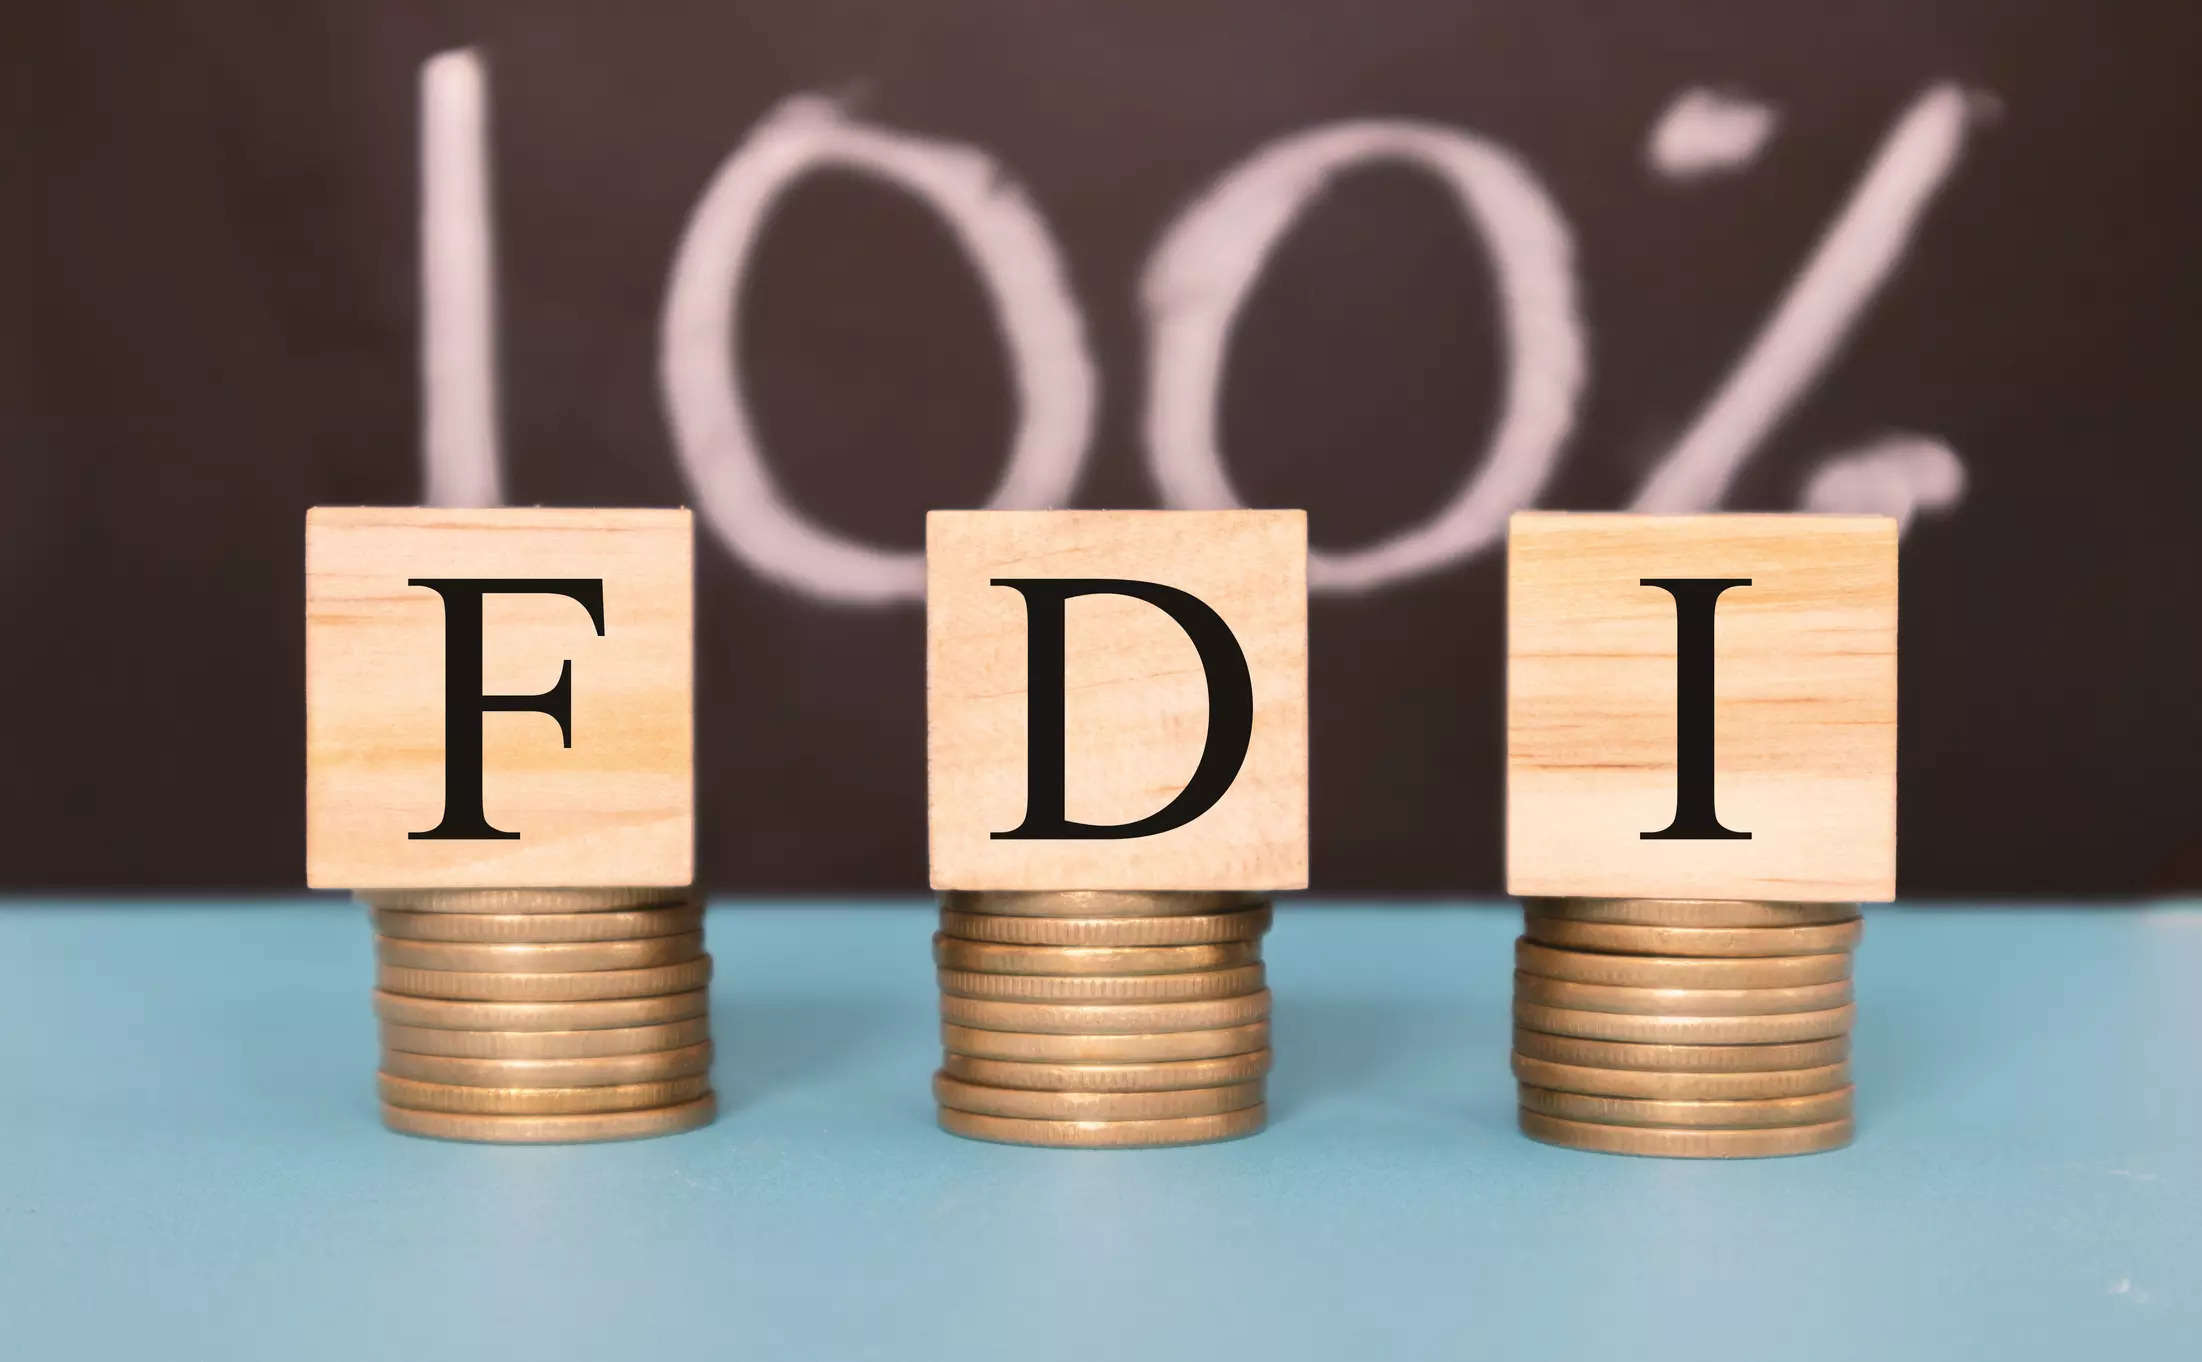  During the year 2019-20, the FDI inflows to India stood at USD 74.39 billion.